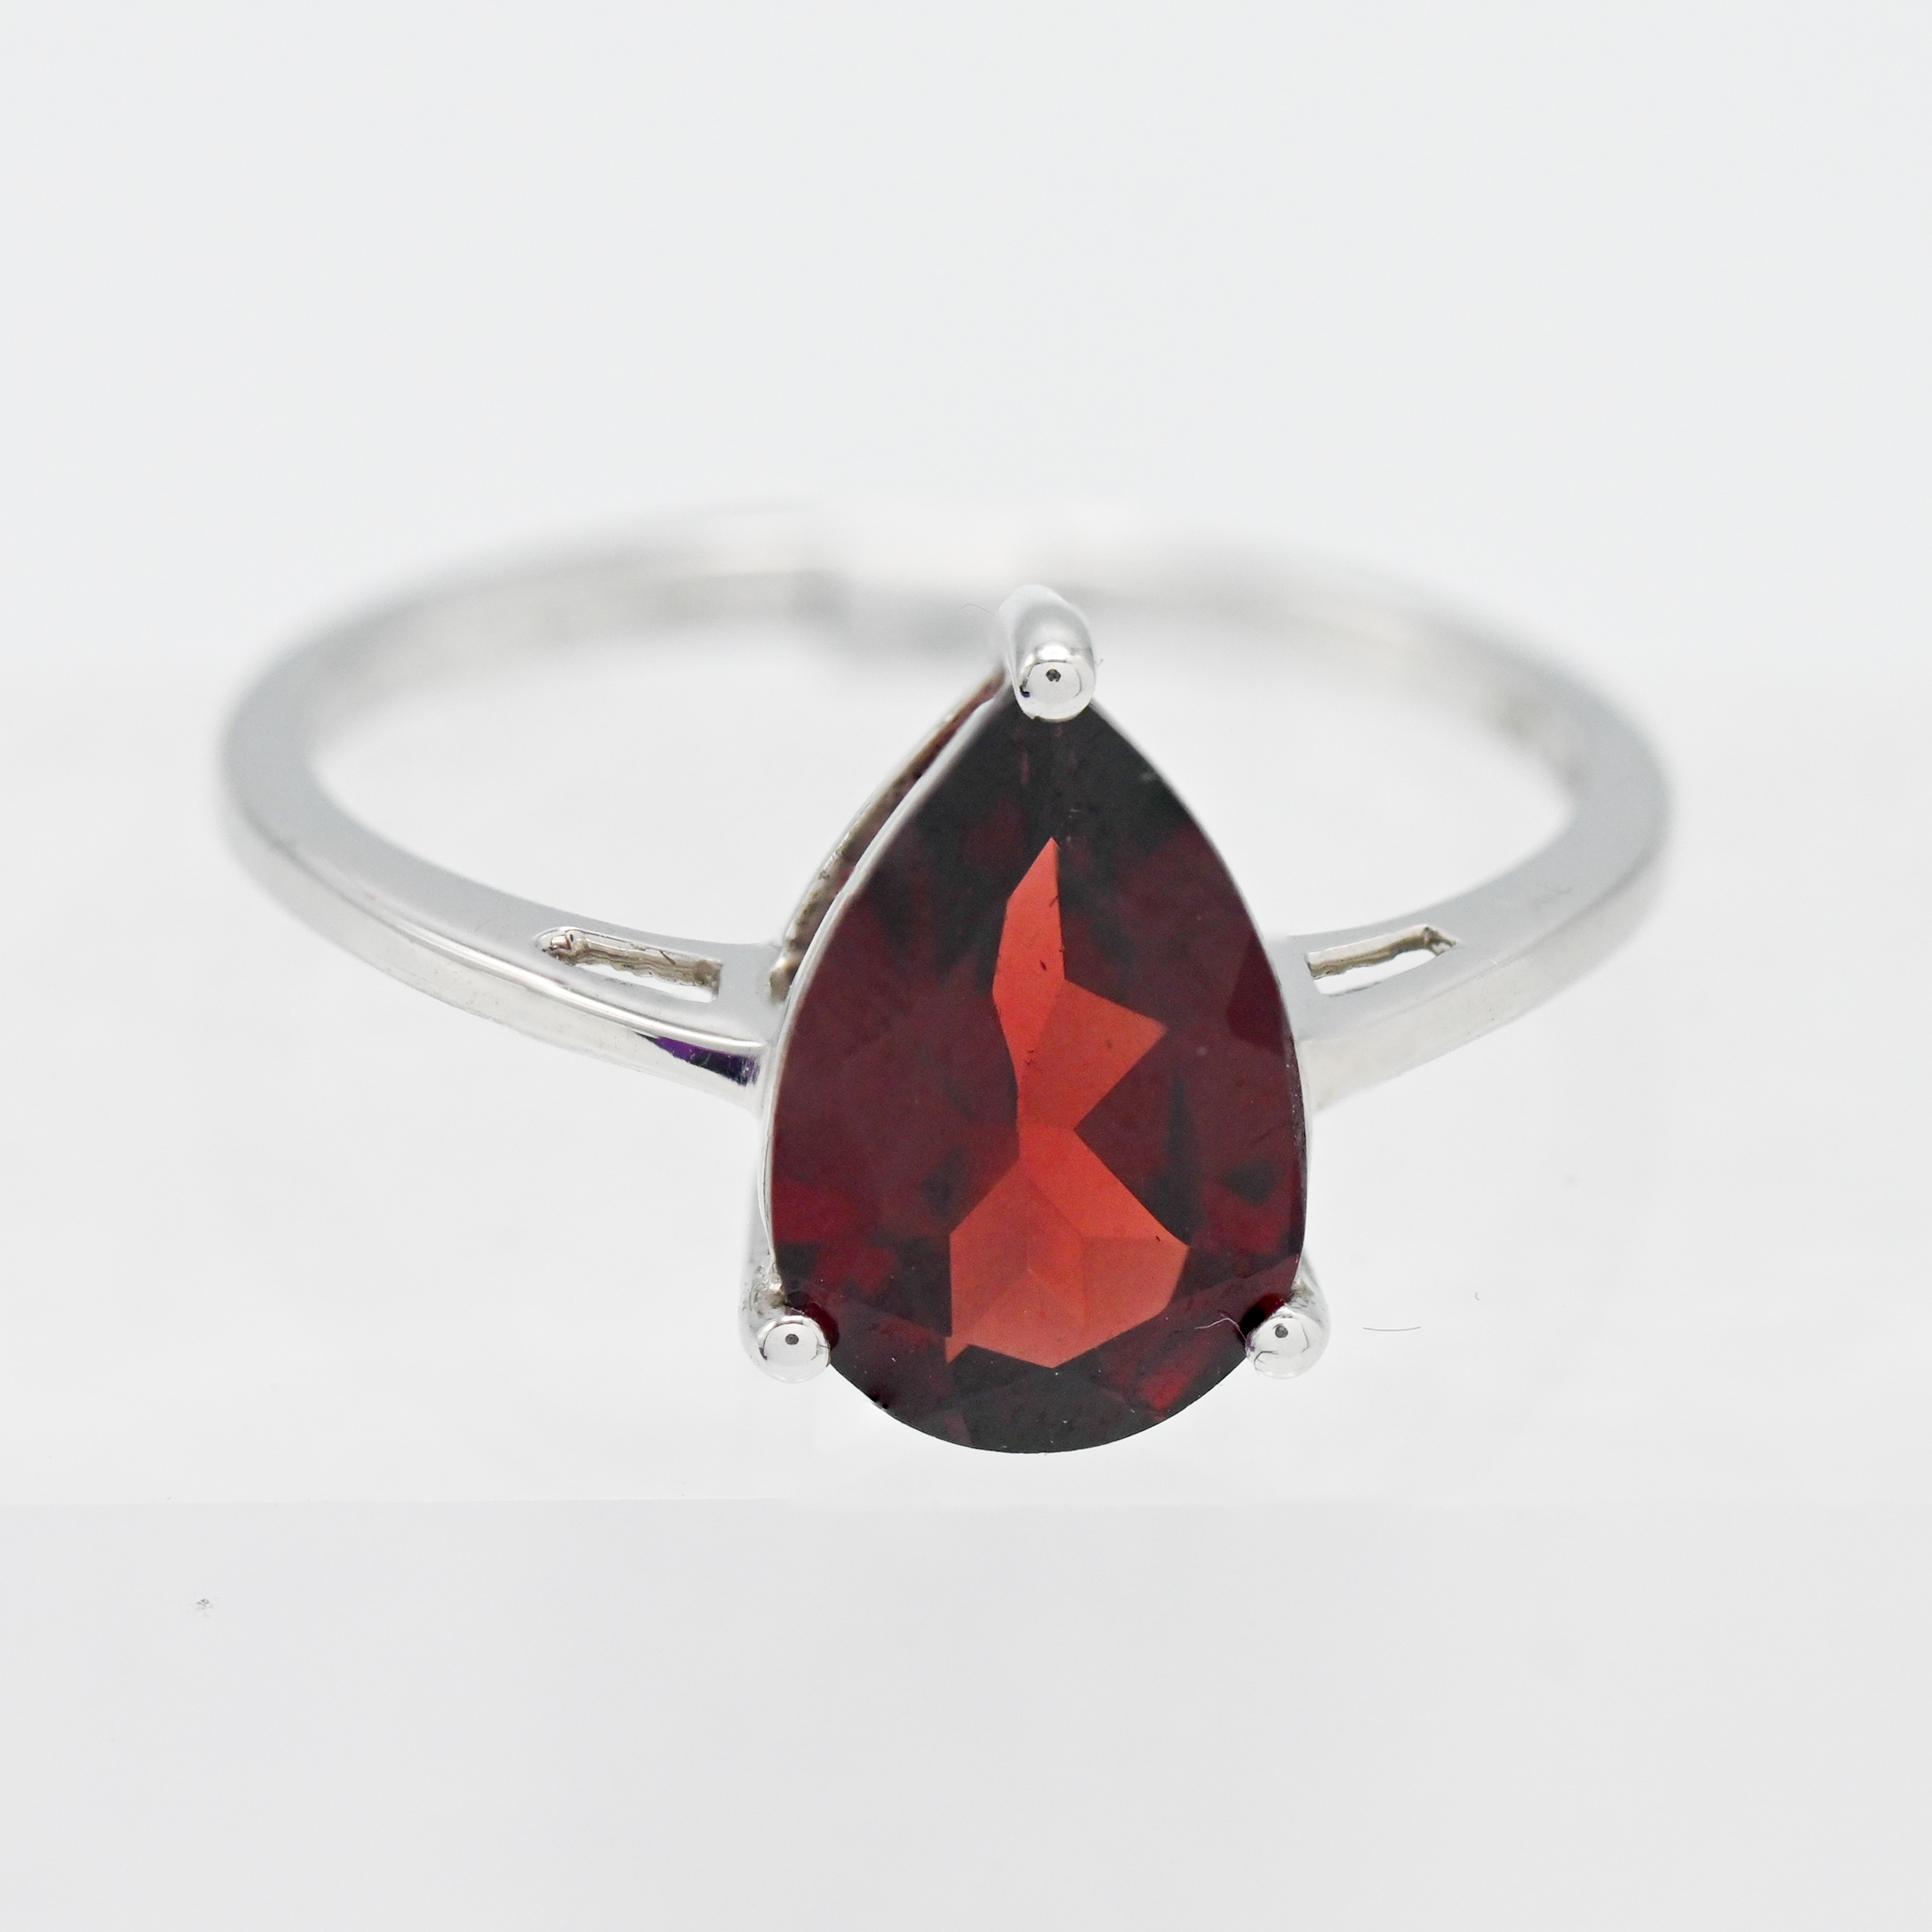 Gemporia, a 9k white gold Rajasthan Garnet ring, size S, with certificate of authenticity.